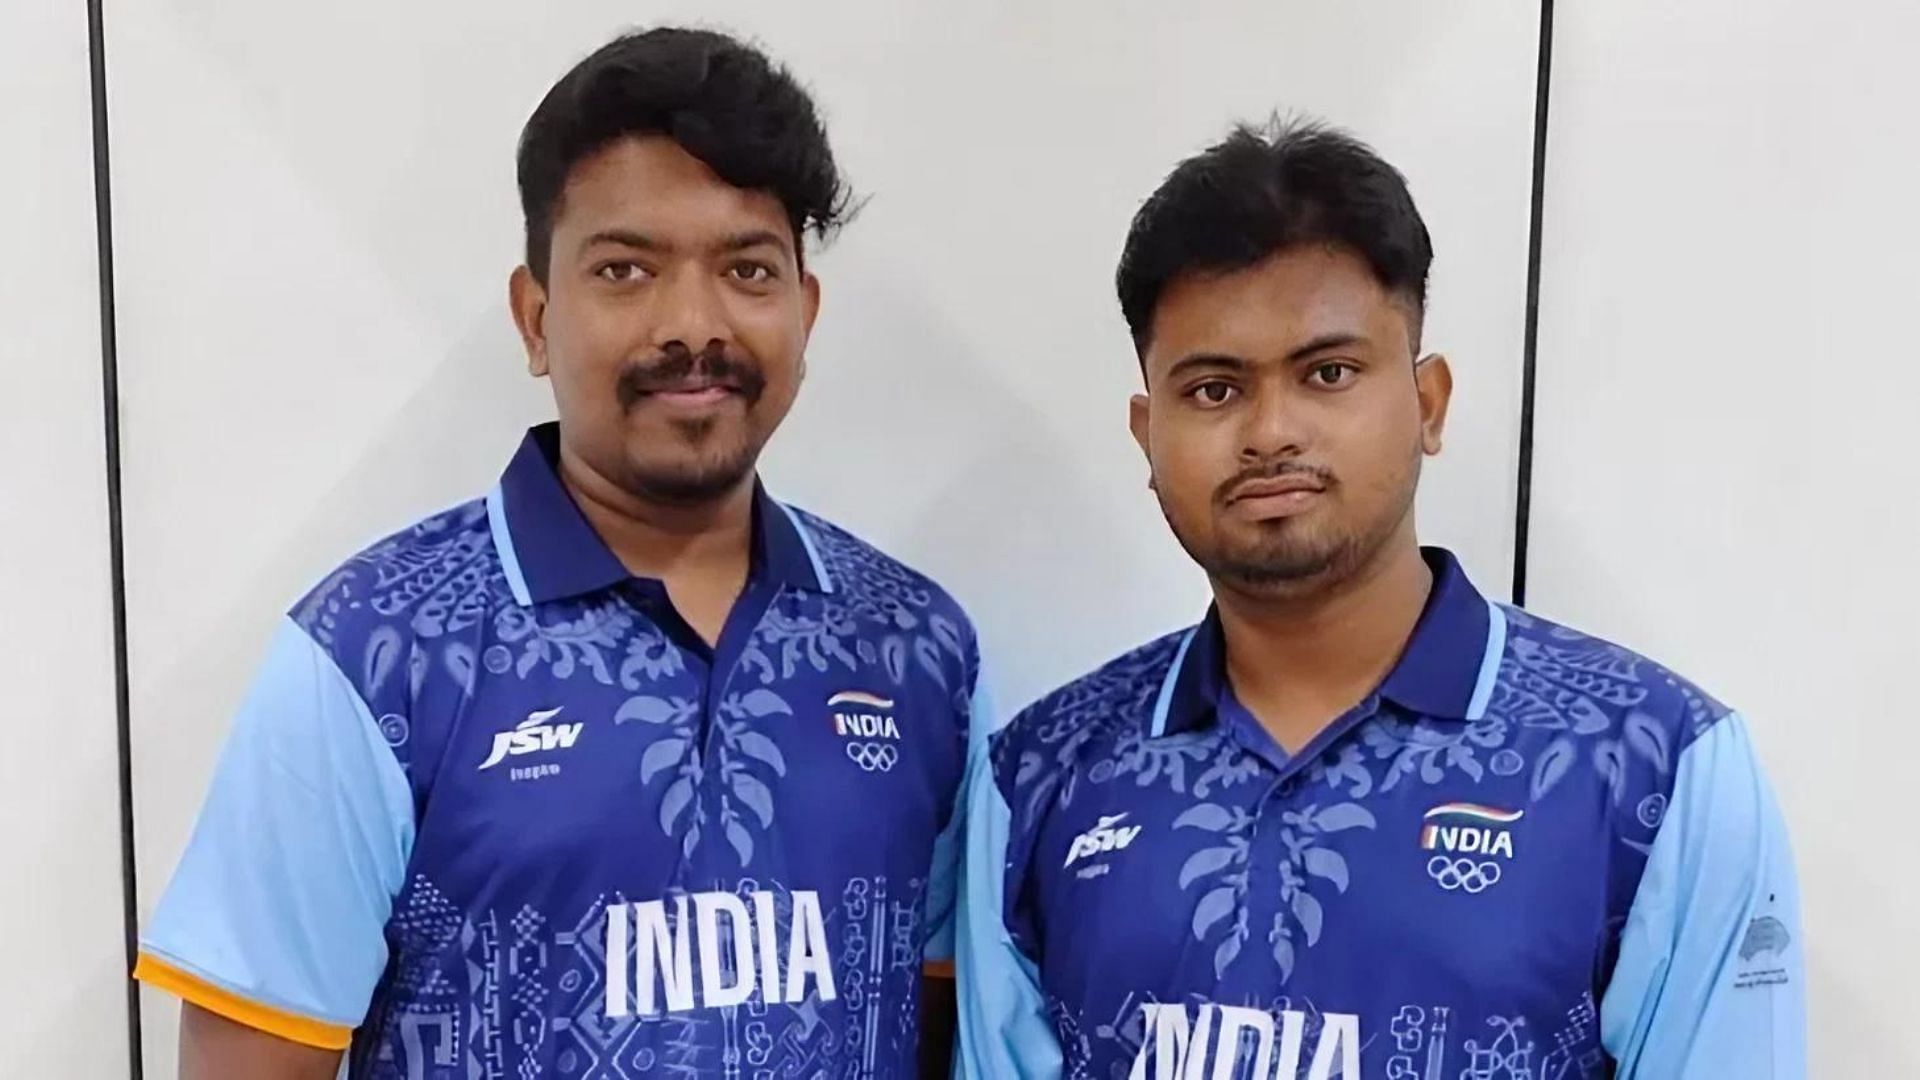 Ayan Biswas and Mayank Prajapati in the frame for representing India in Asian Games 2023 